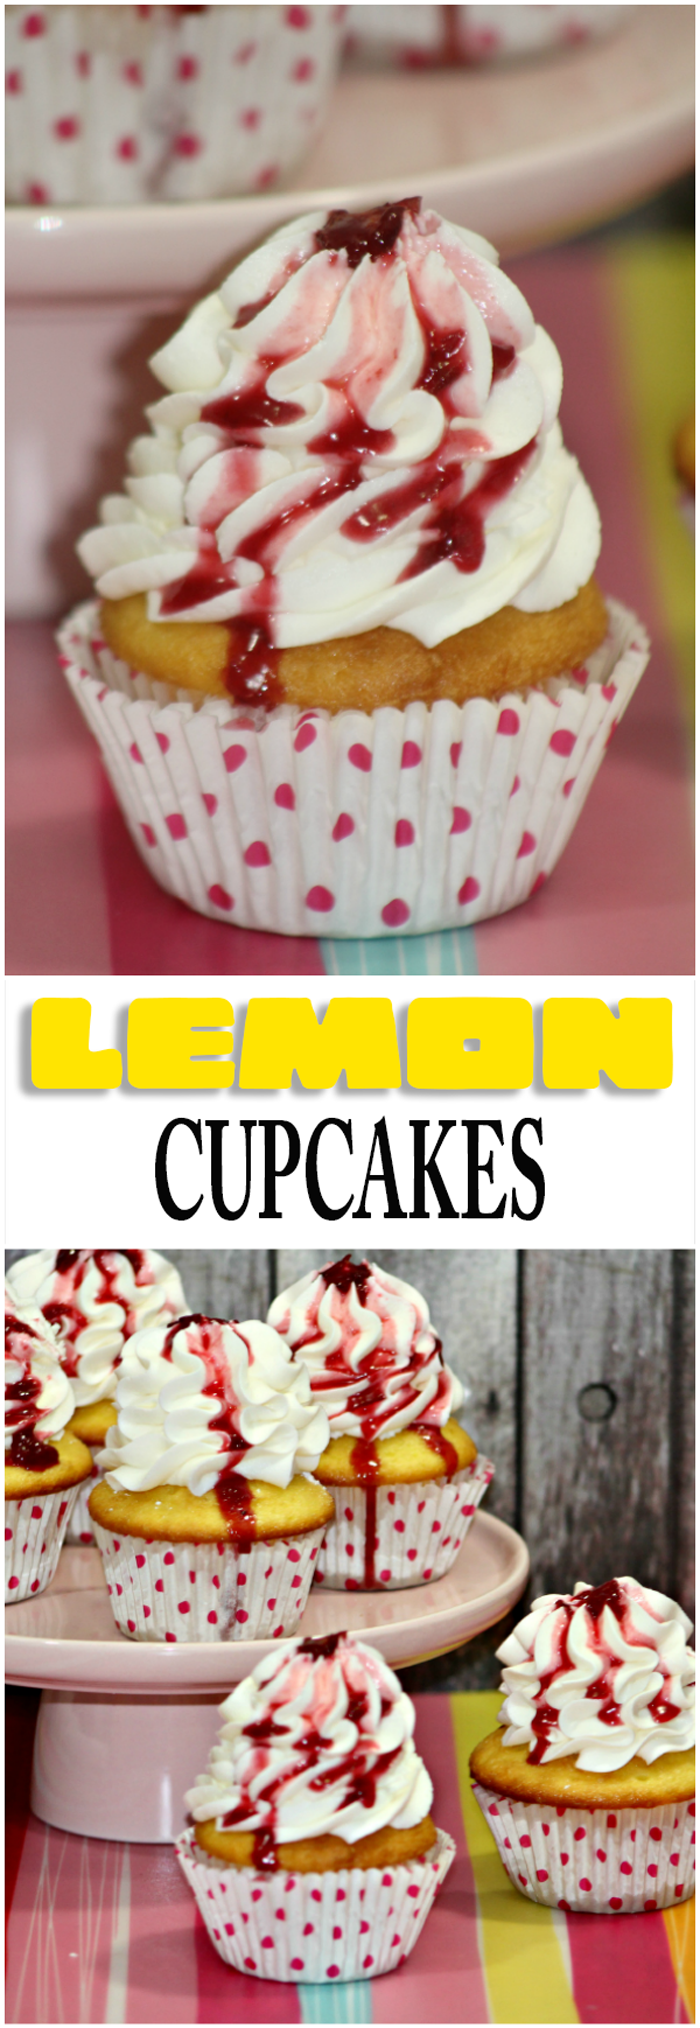 Lemon Cupcakes Recipe that is extremely easy to make even though they are from scratch by food blogger from April Golightly